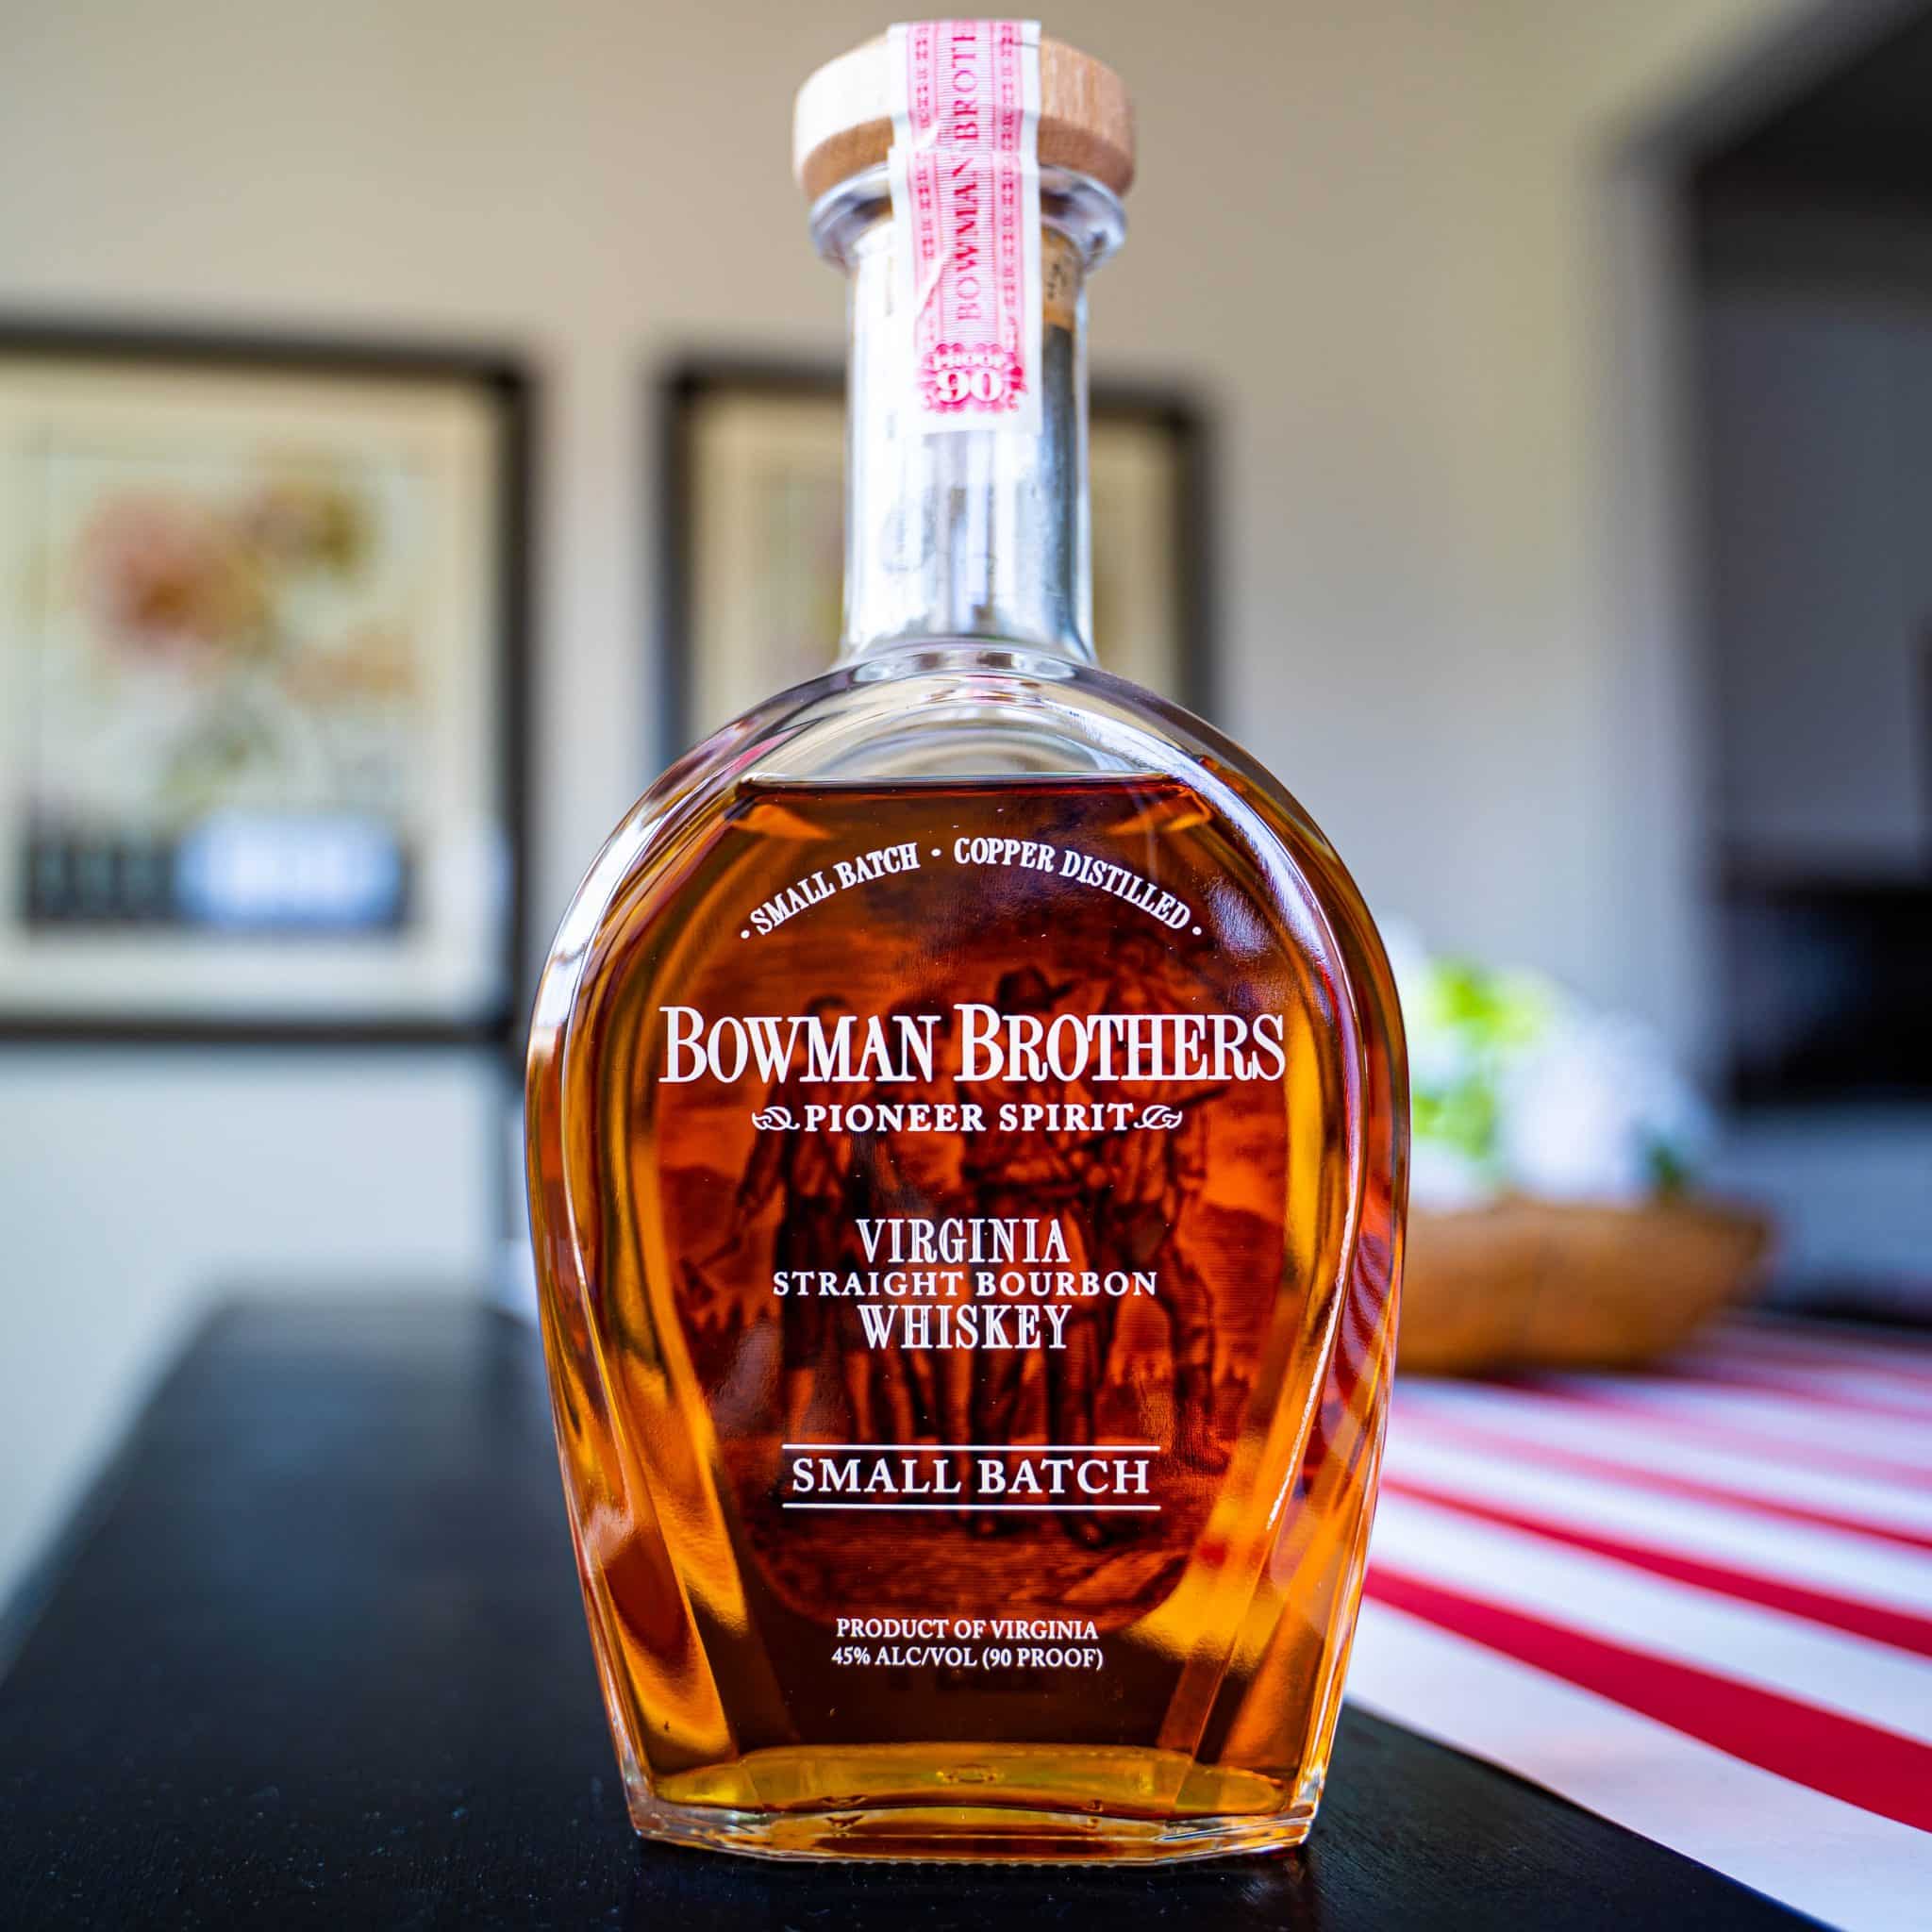 Bowman Brothers Virginia Straight Bourbon Whiskey Small Batch Review ...